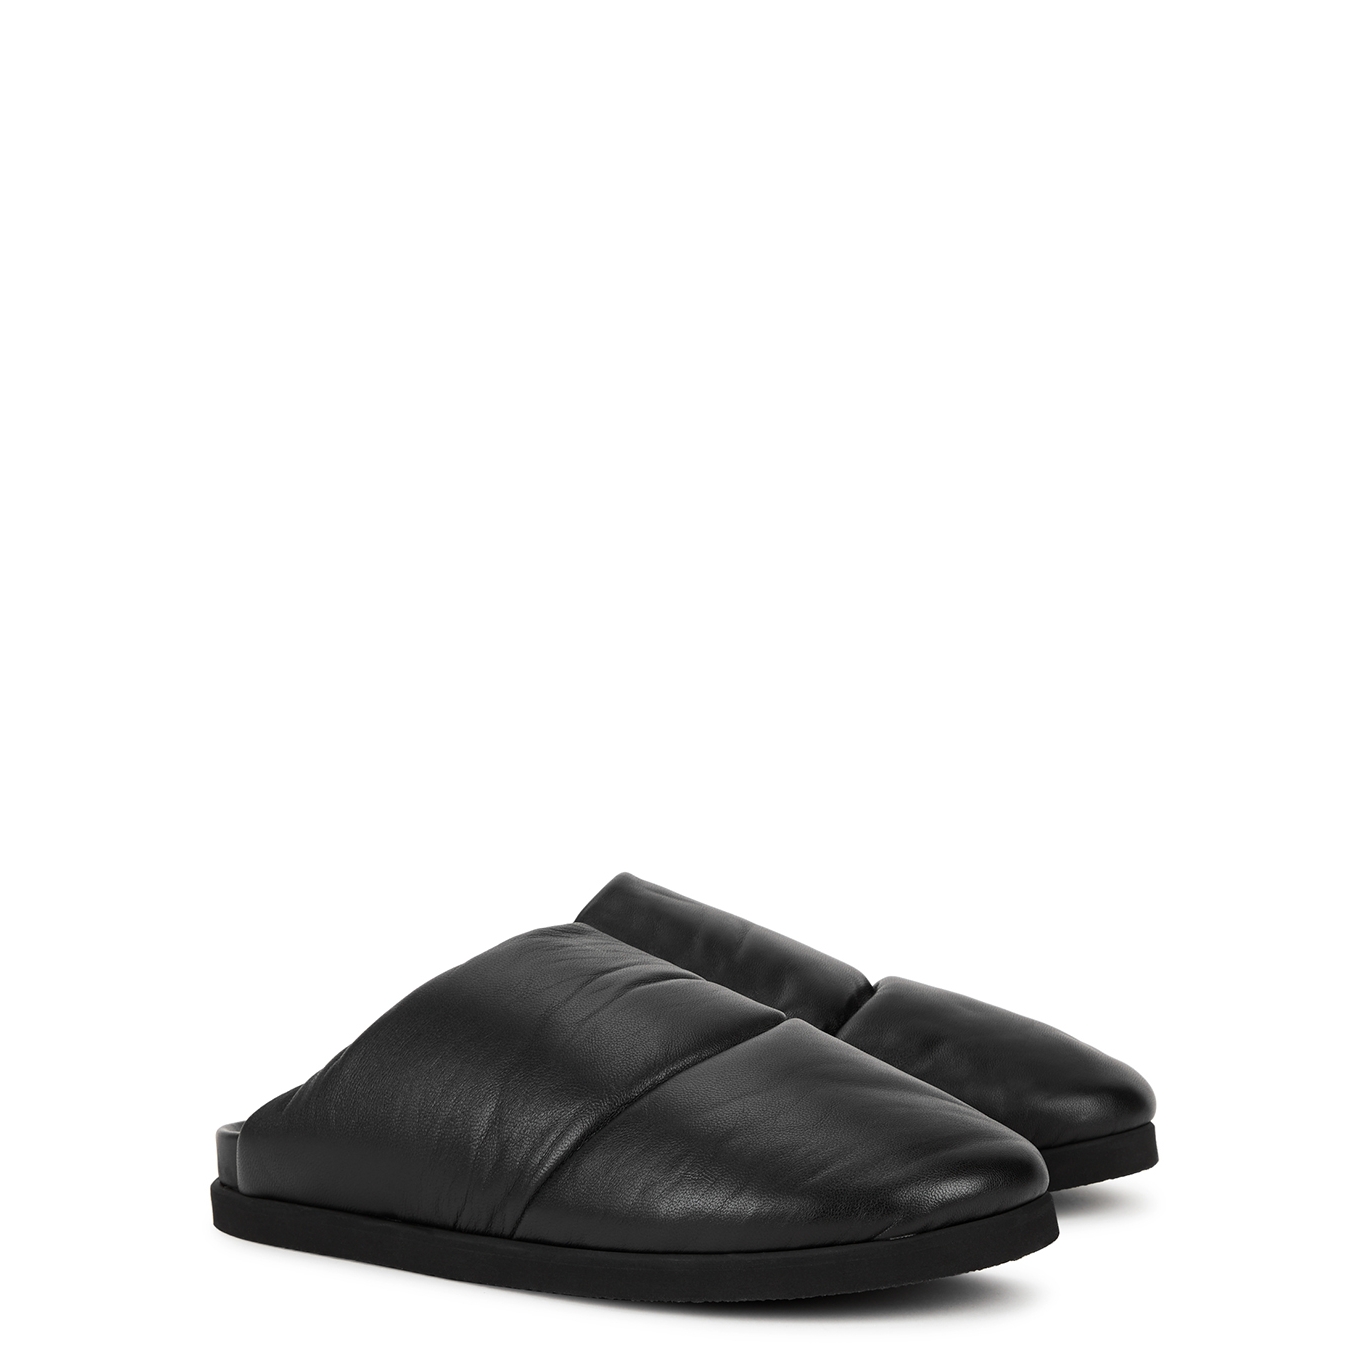 MONCLER GENIUS 1 MONCLER JW ANDERSON QUILTED LEATHER MULES